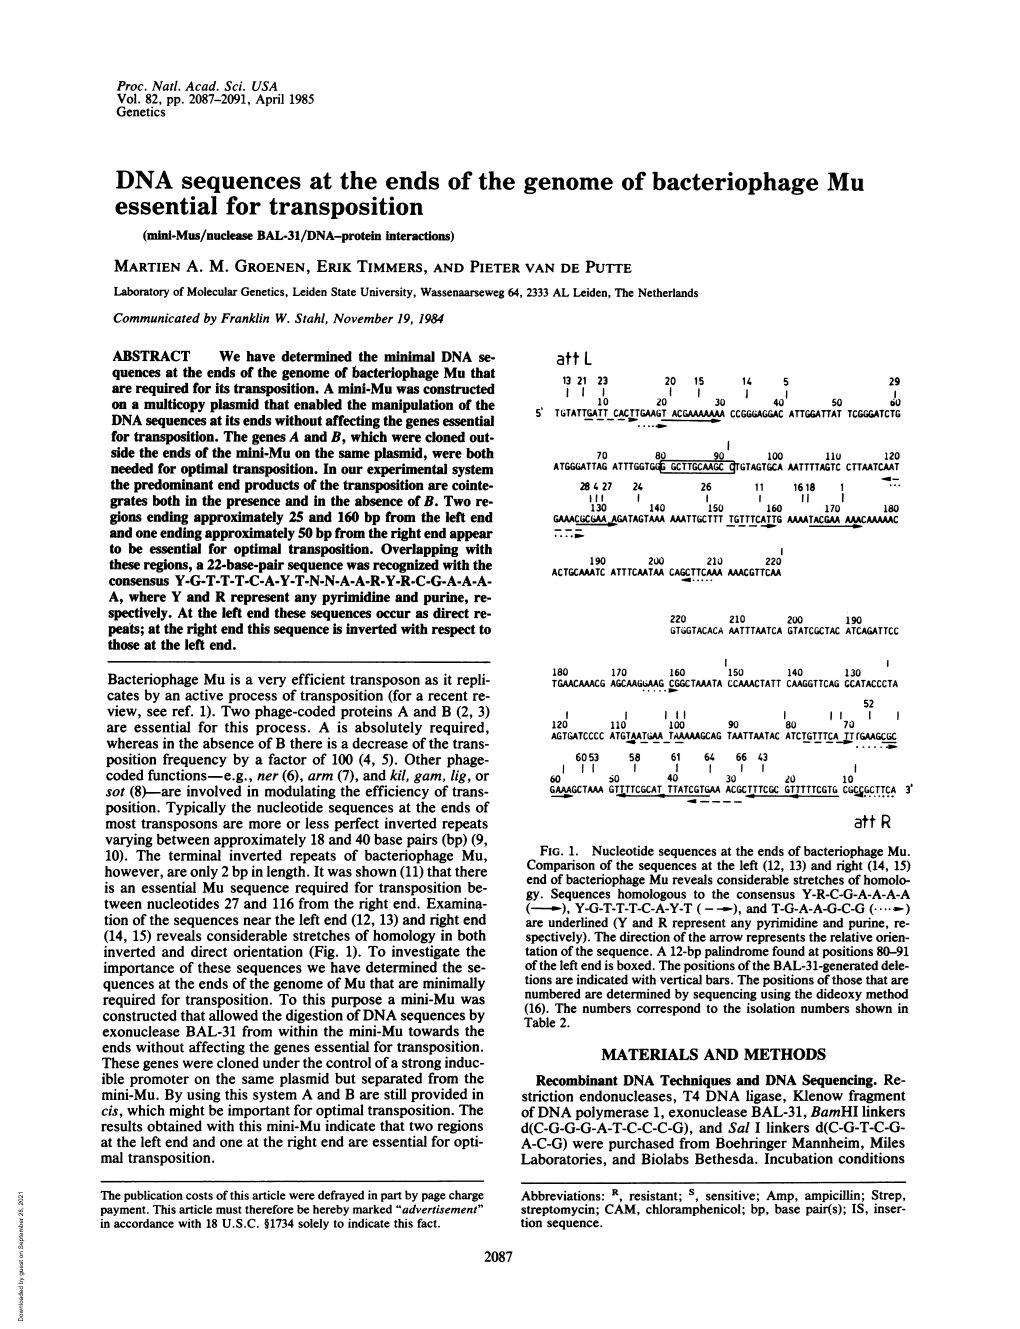 DNA Sequences at the Ends of the Genome of Bacteriophage Mu Essential for Transposition (Mini-Mus/Nudease BAL-31/DNA-Protein Interactions) MARTIEN A